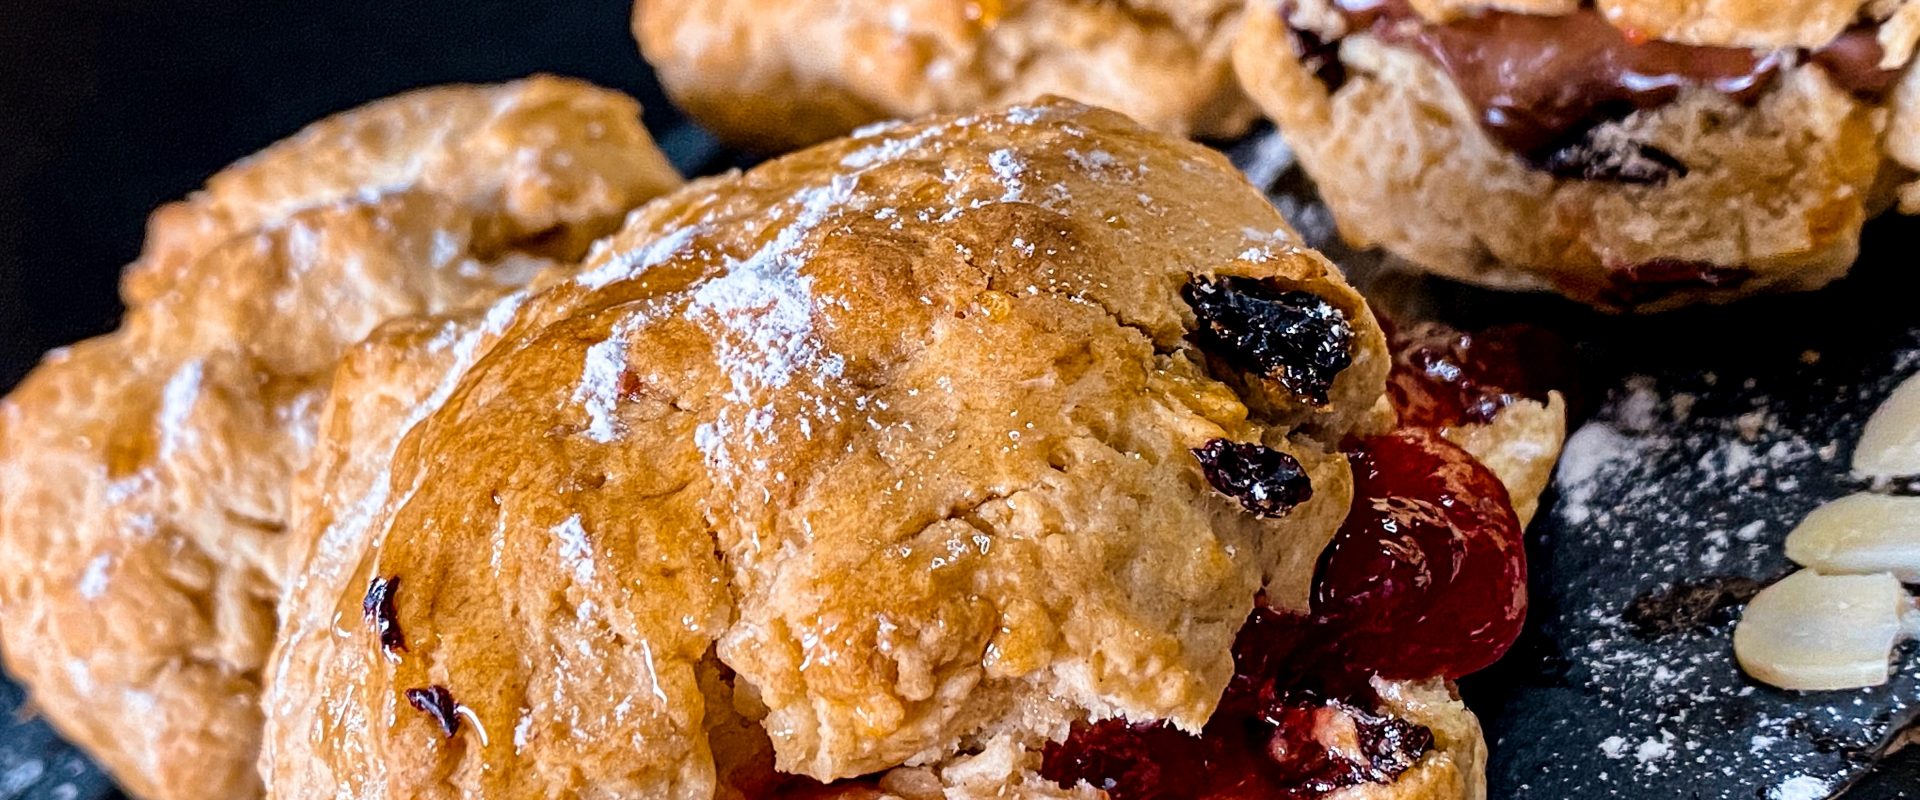 Get your fix of almond scones with smashed berries